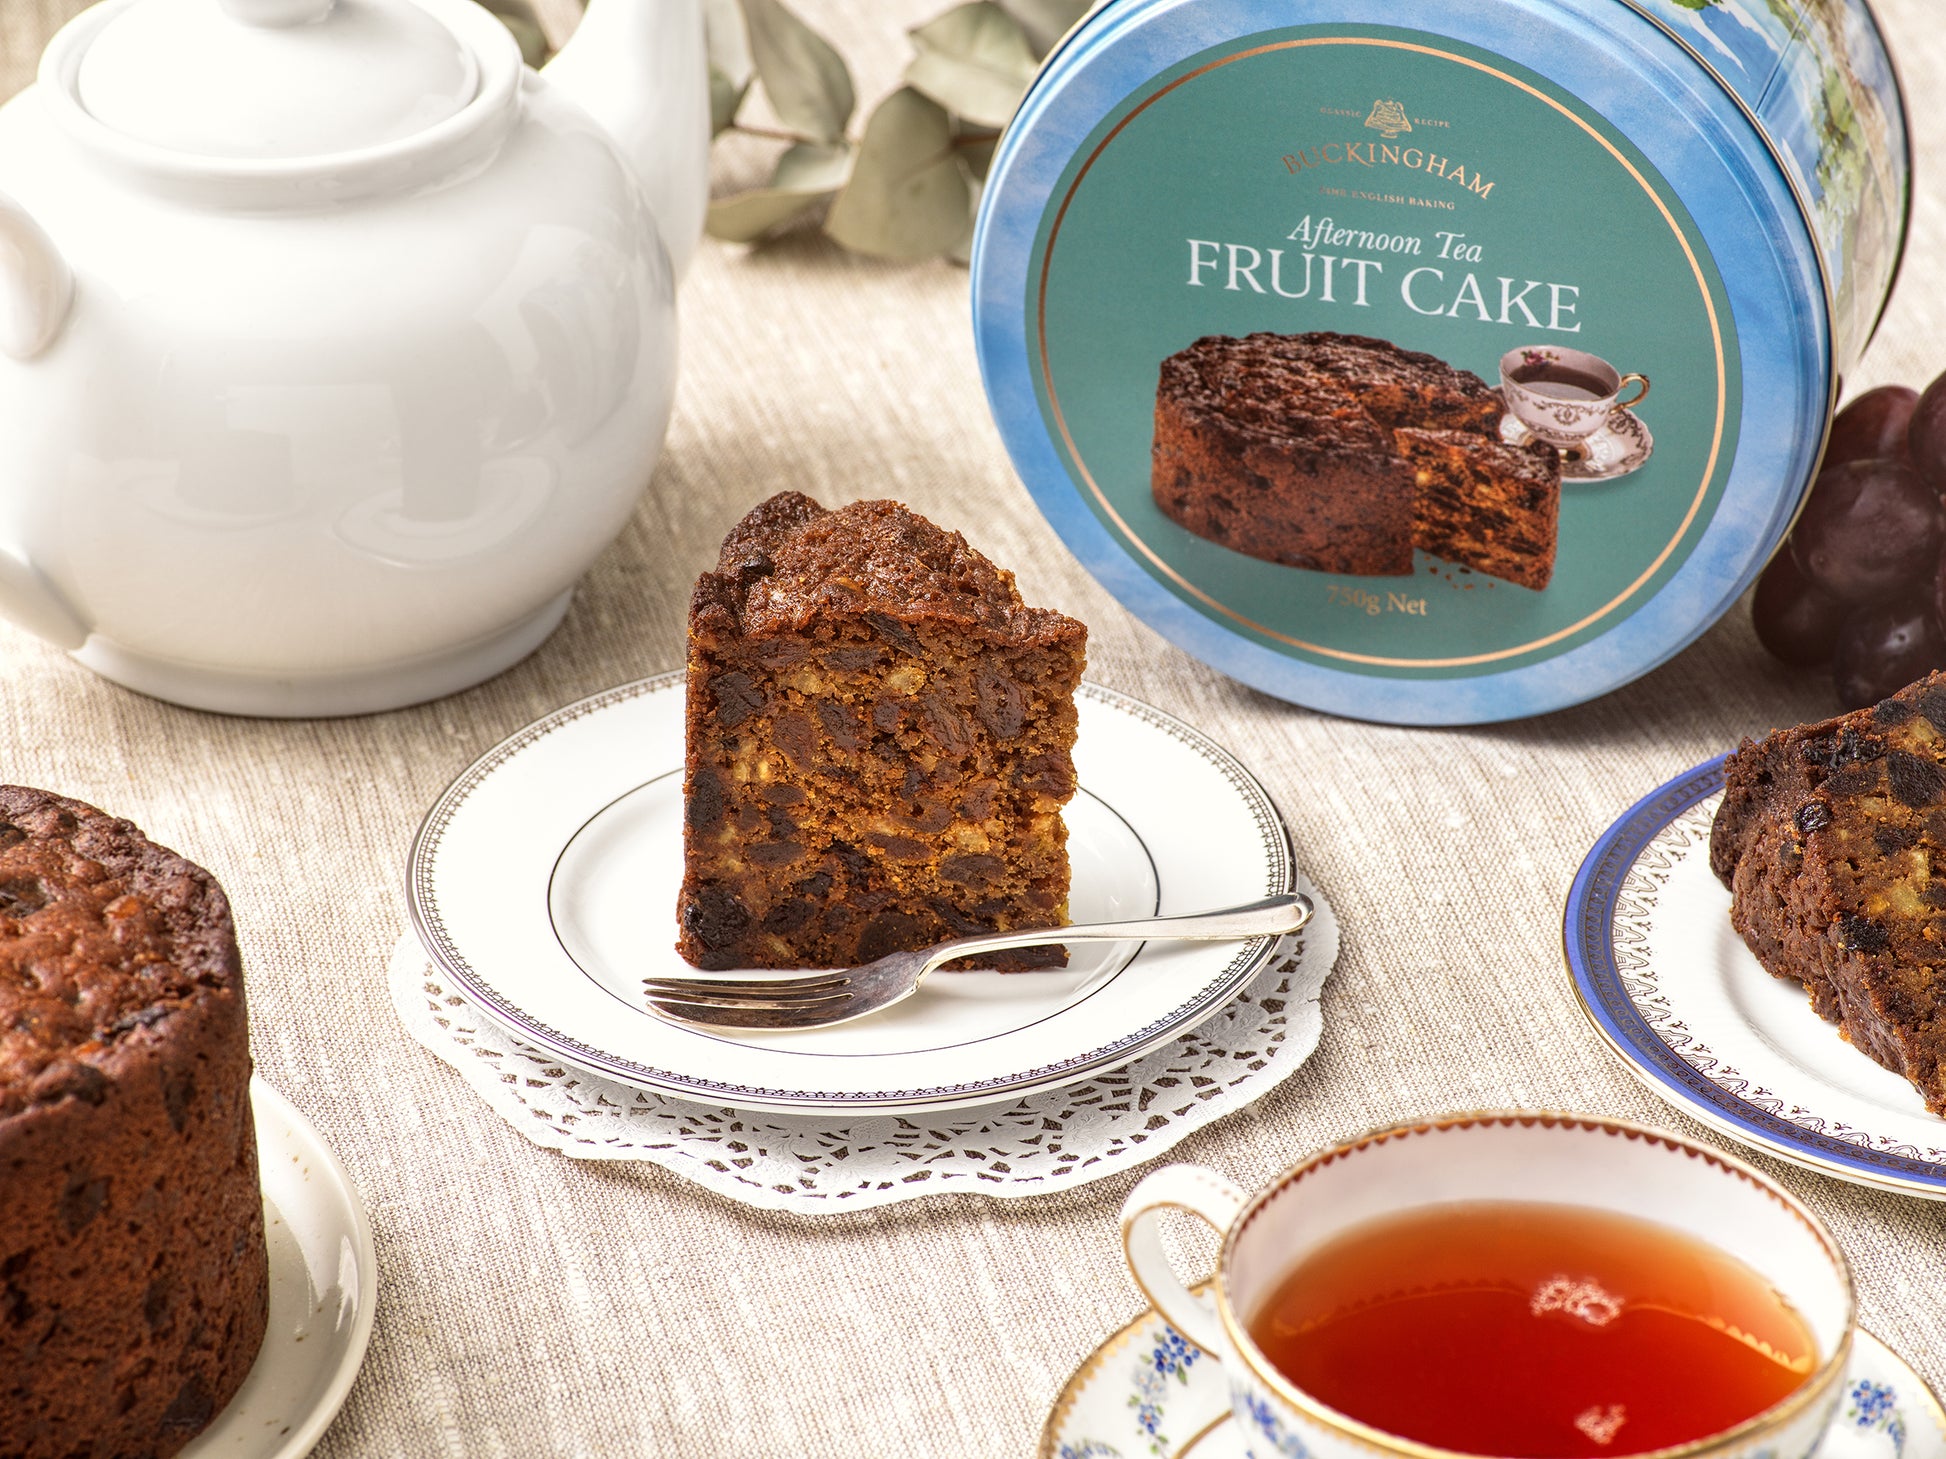 Slice of fruit cake with cup of Earl Grey tea.